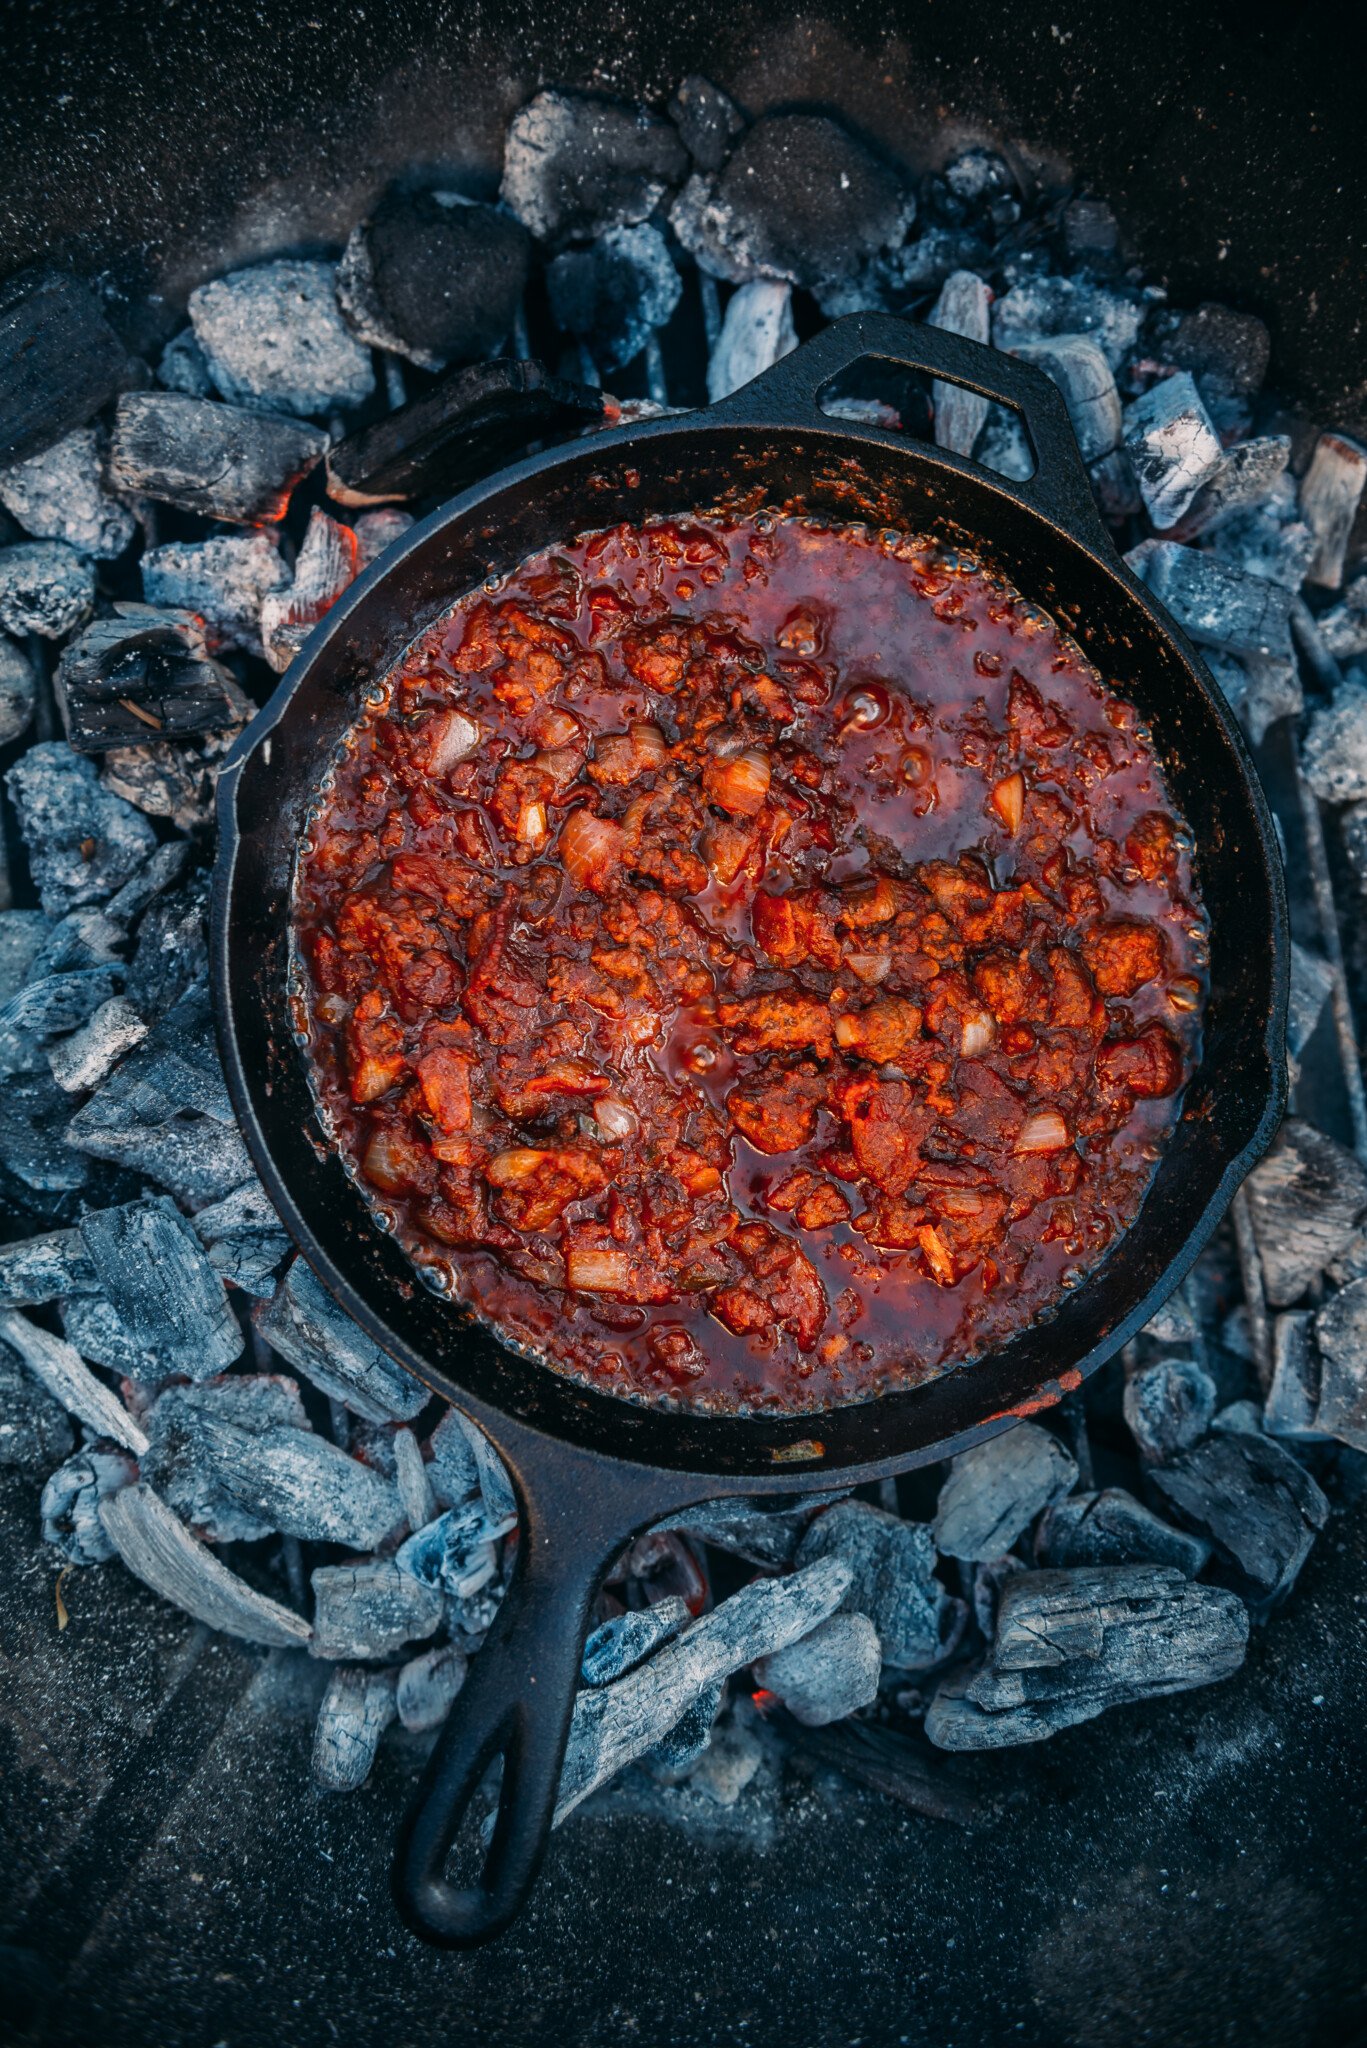 Cast iron skillet on coals filled with sloppy joe filling.